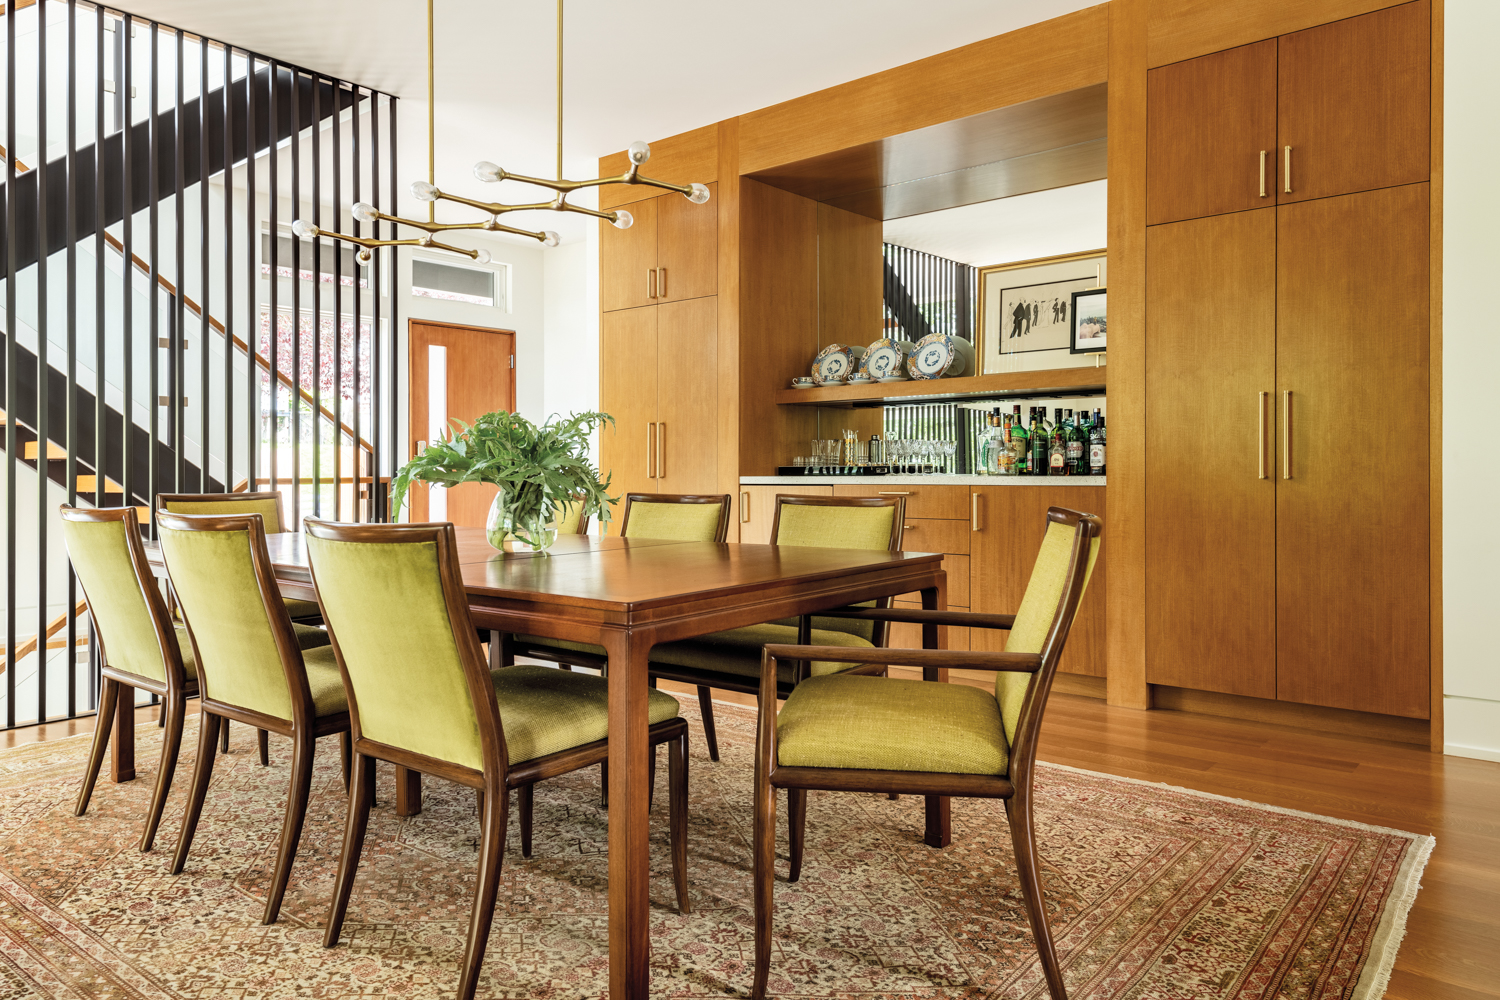 Green-upholstered chairs surround the dining...